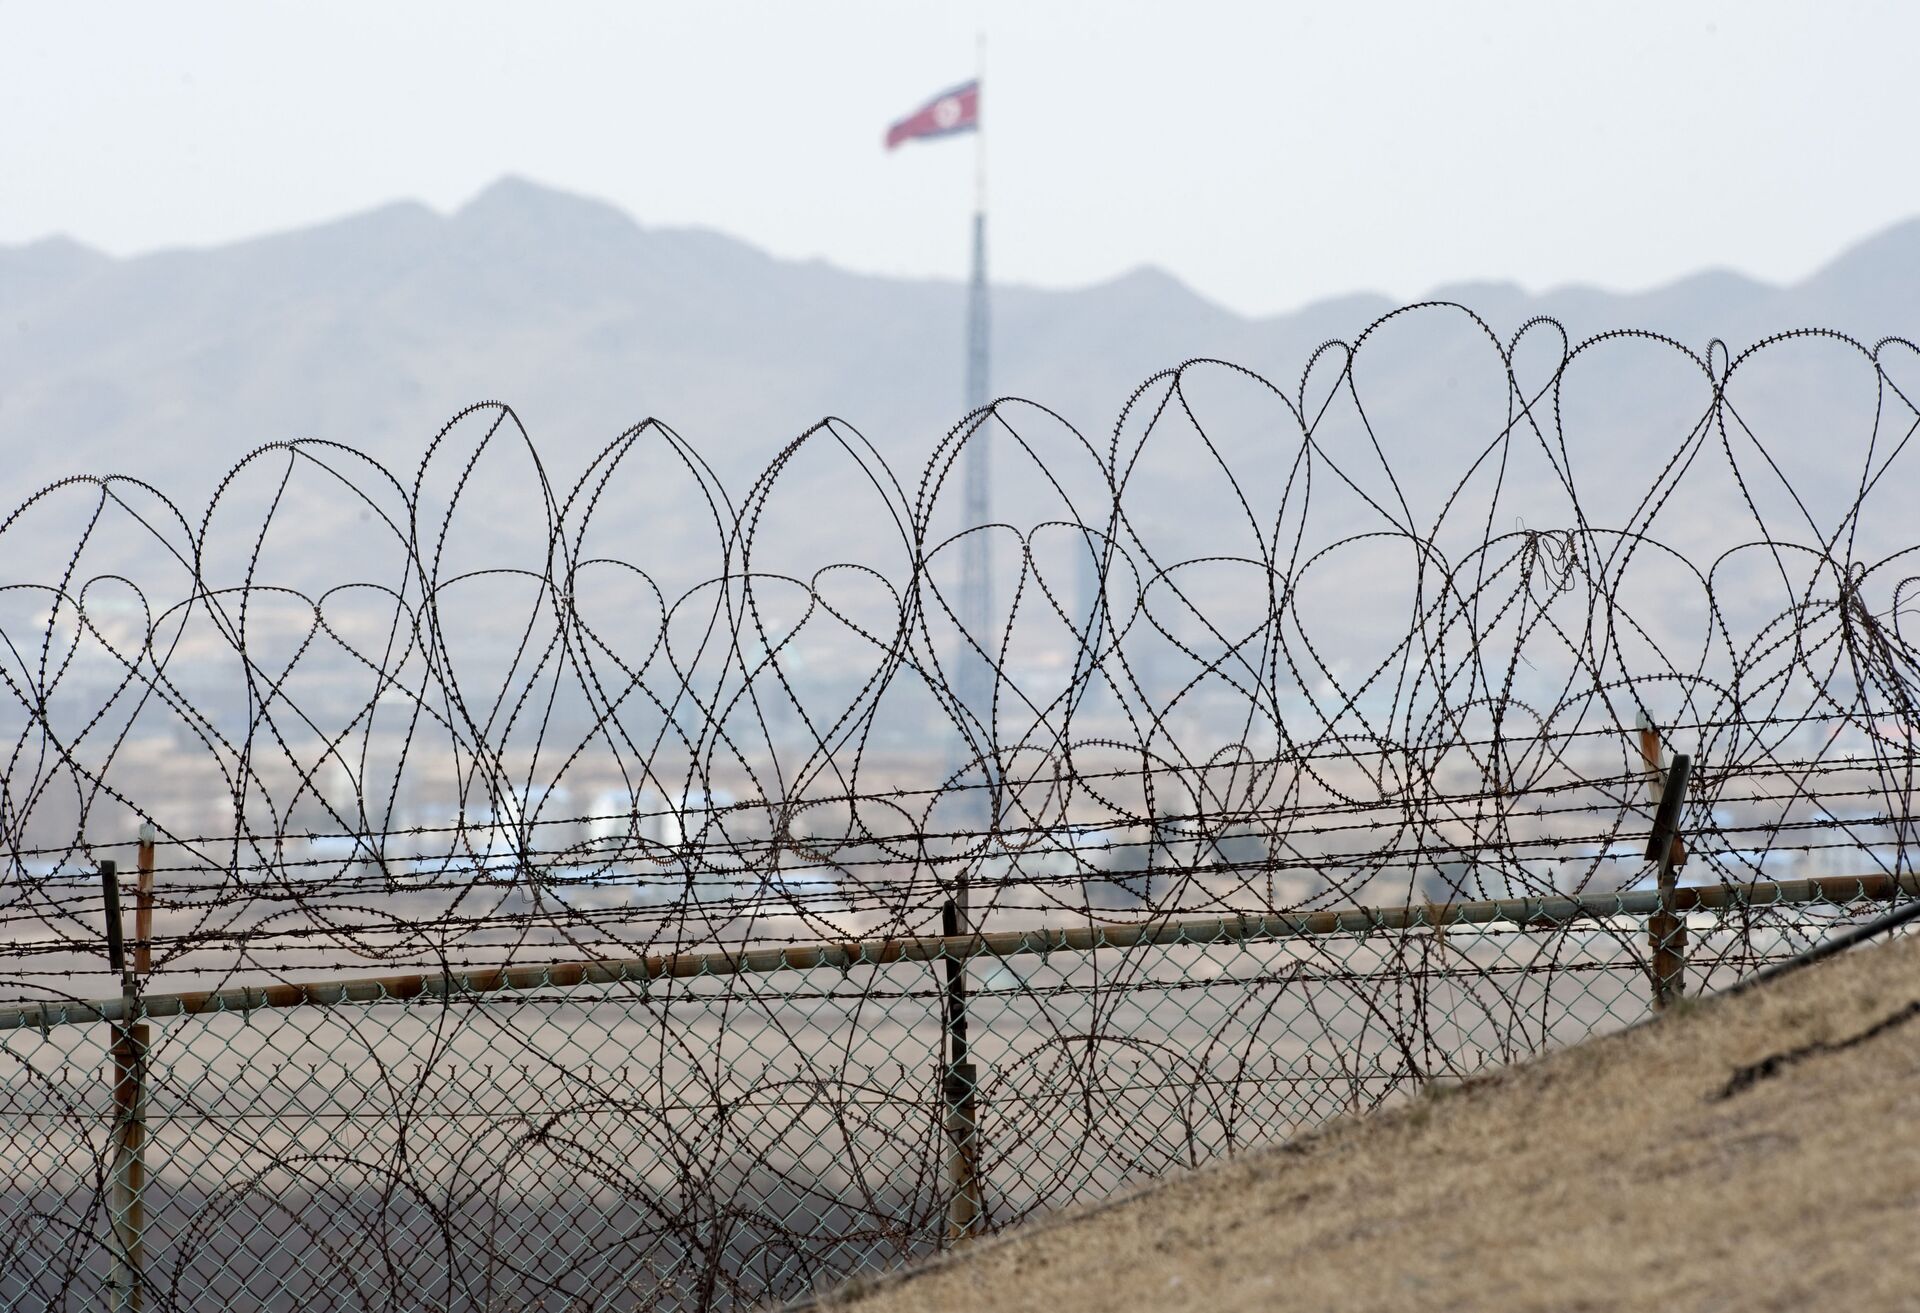 A North Korean flag behind the barbed wire of the Demilitarized Zone (DMZS) in the Joint Security Area near Panmunjom on the border between North and South Korea - Sputnik International, 1920, 04.11.2021